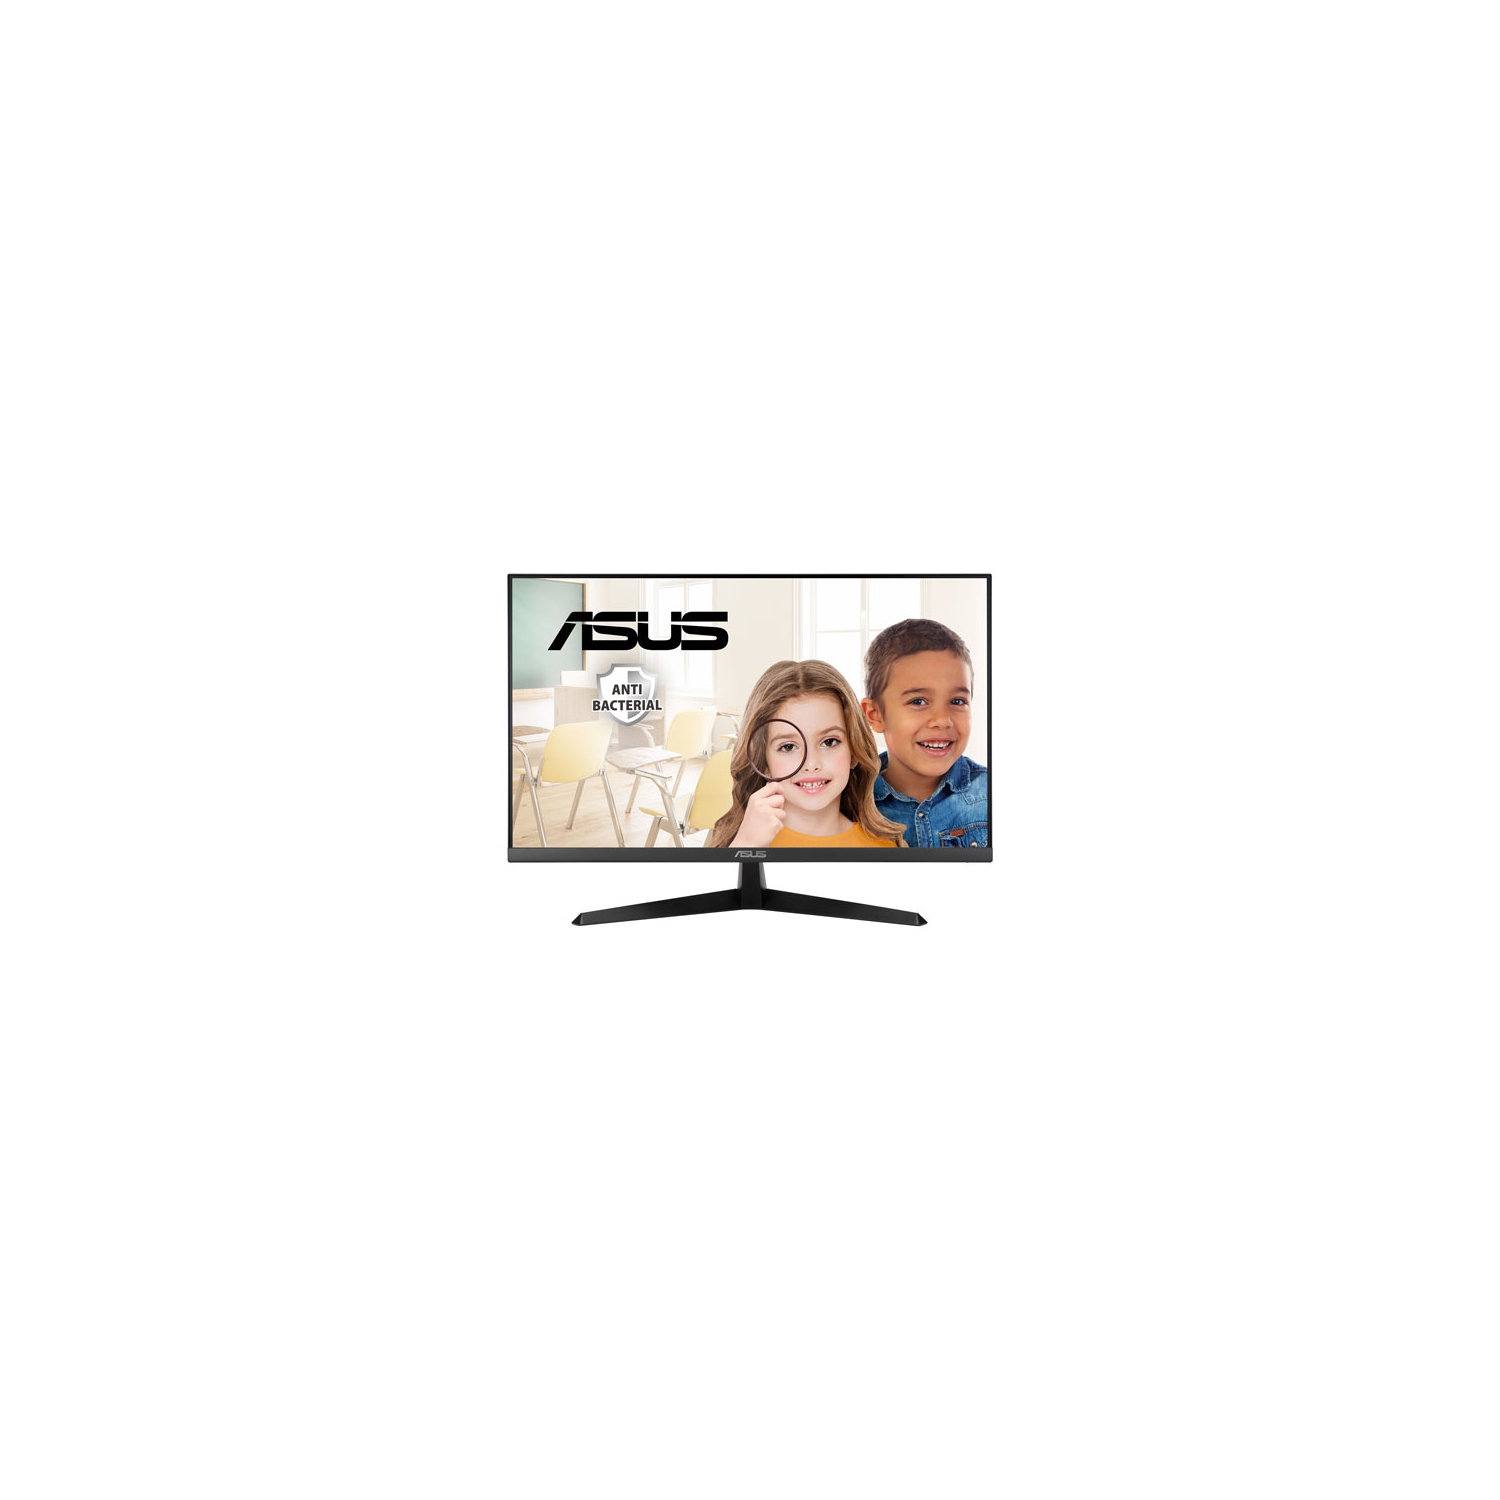 ASUS 27" FHD 75Hz IPS LCD FreeSync Monitor (VY279HE) - Black